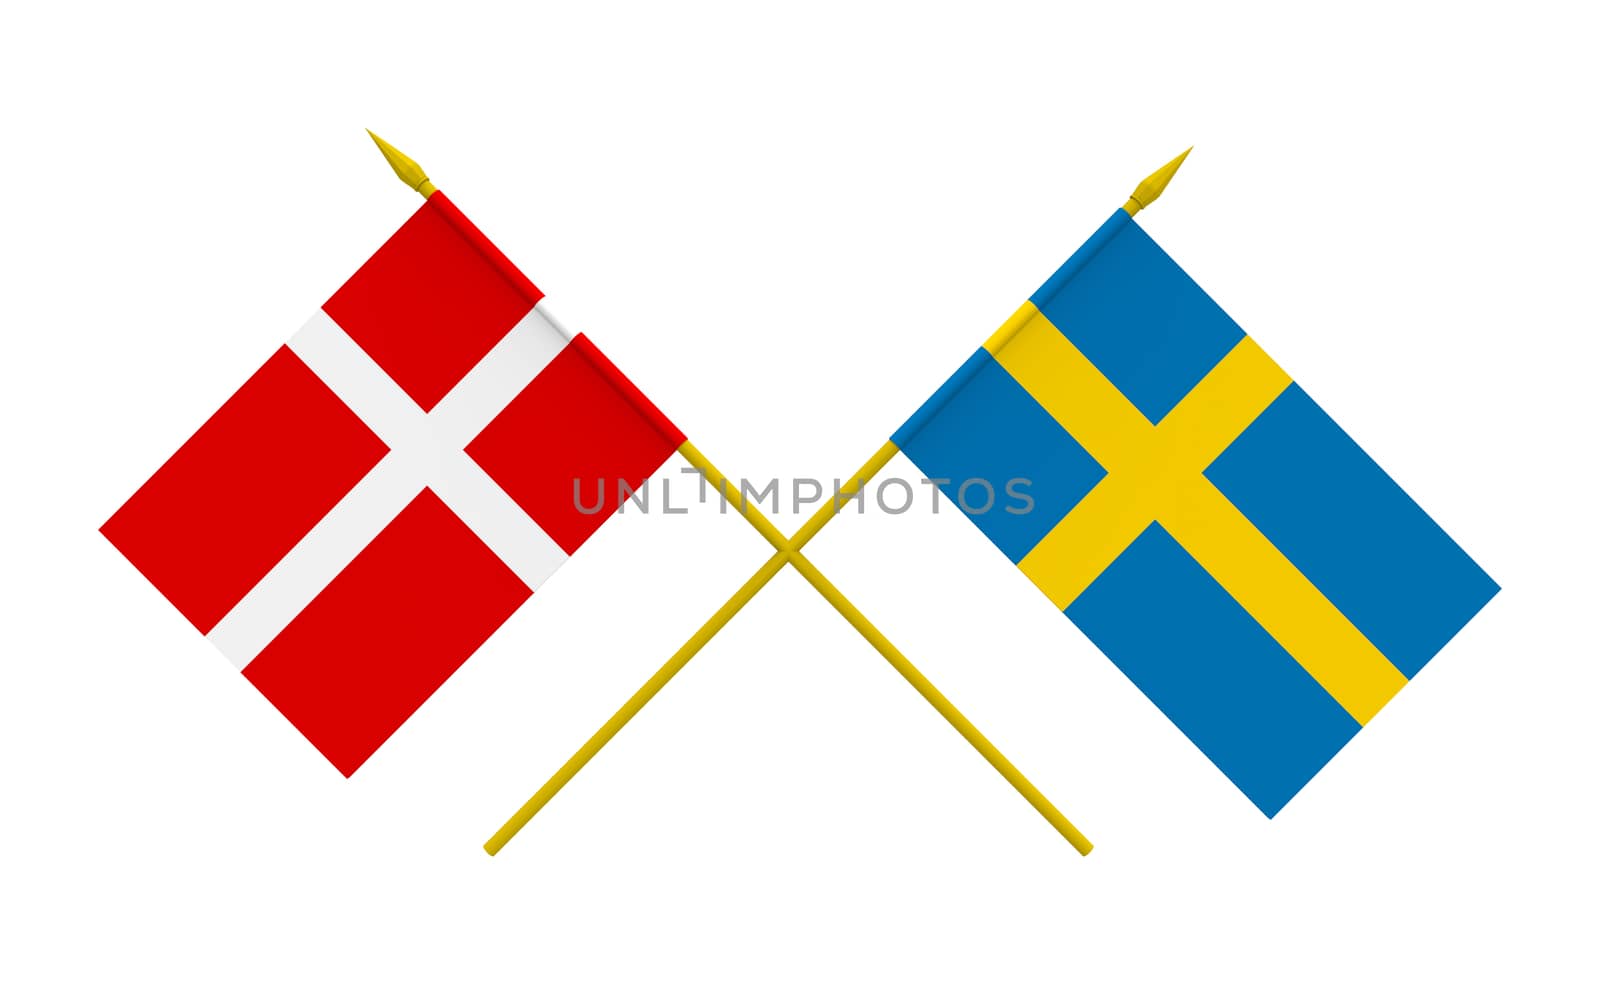 Flags of Denmark and Sweden, 3d render, isolated on white